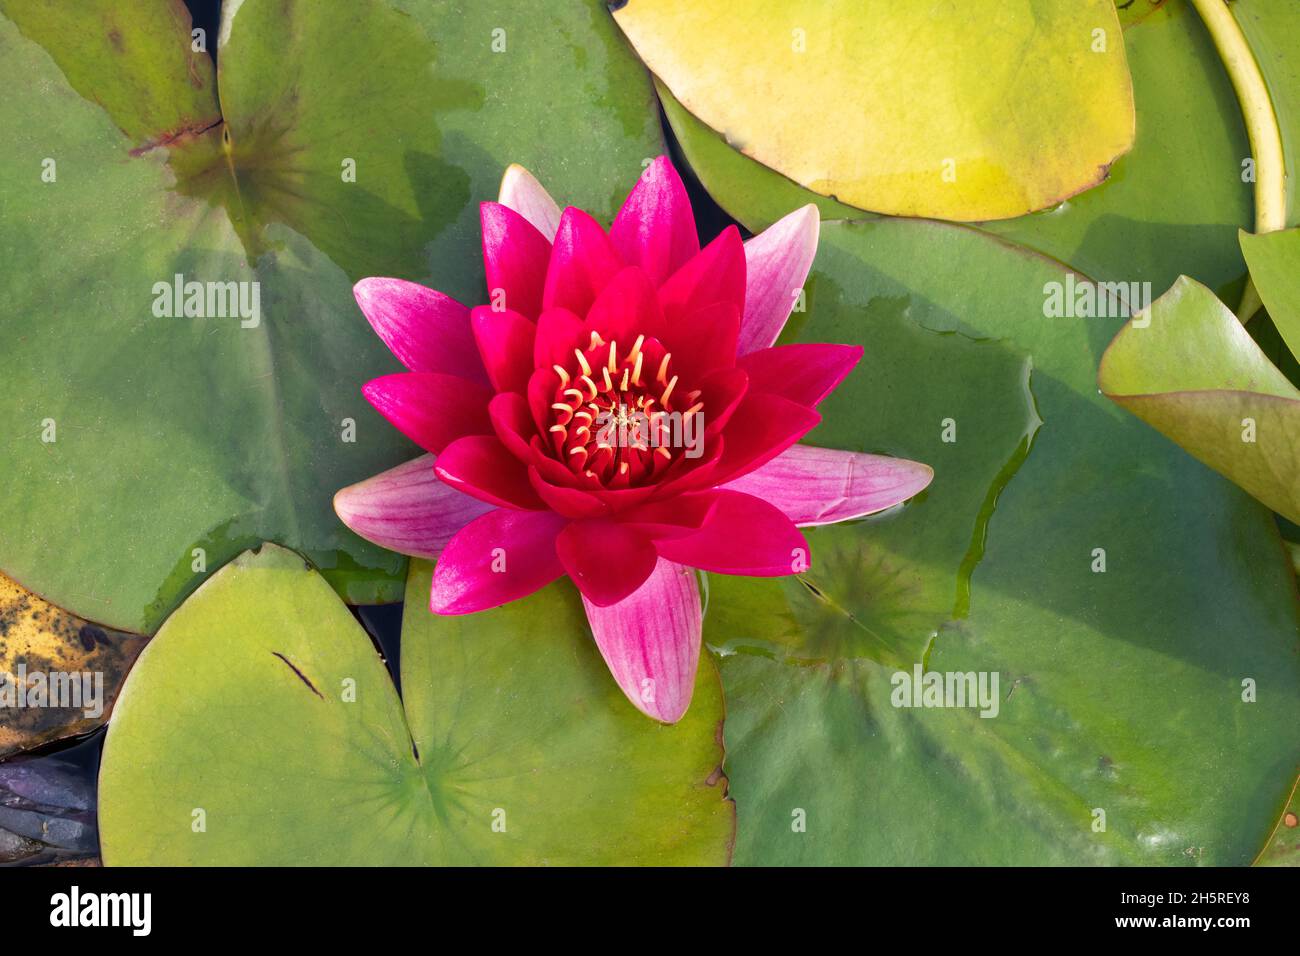 Cultivated variety of garden pond Waterlily (Nymphaea sp. variety). Close up of a single flower. Stock Photo